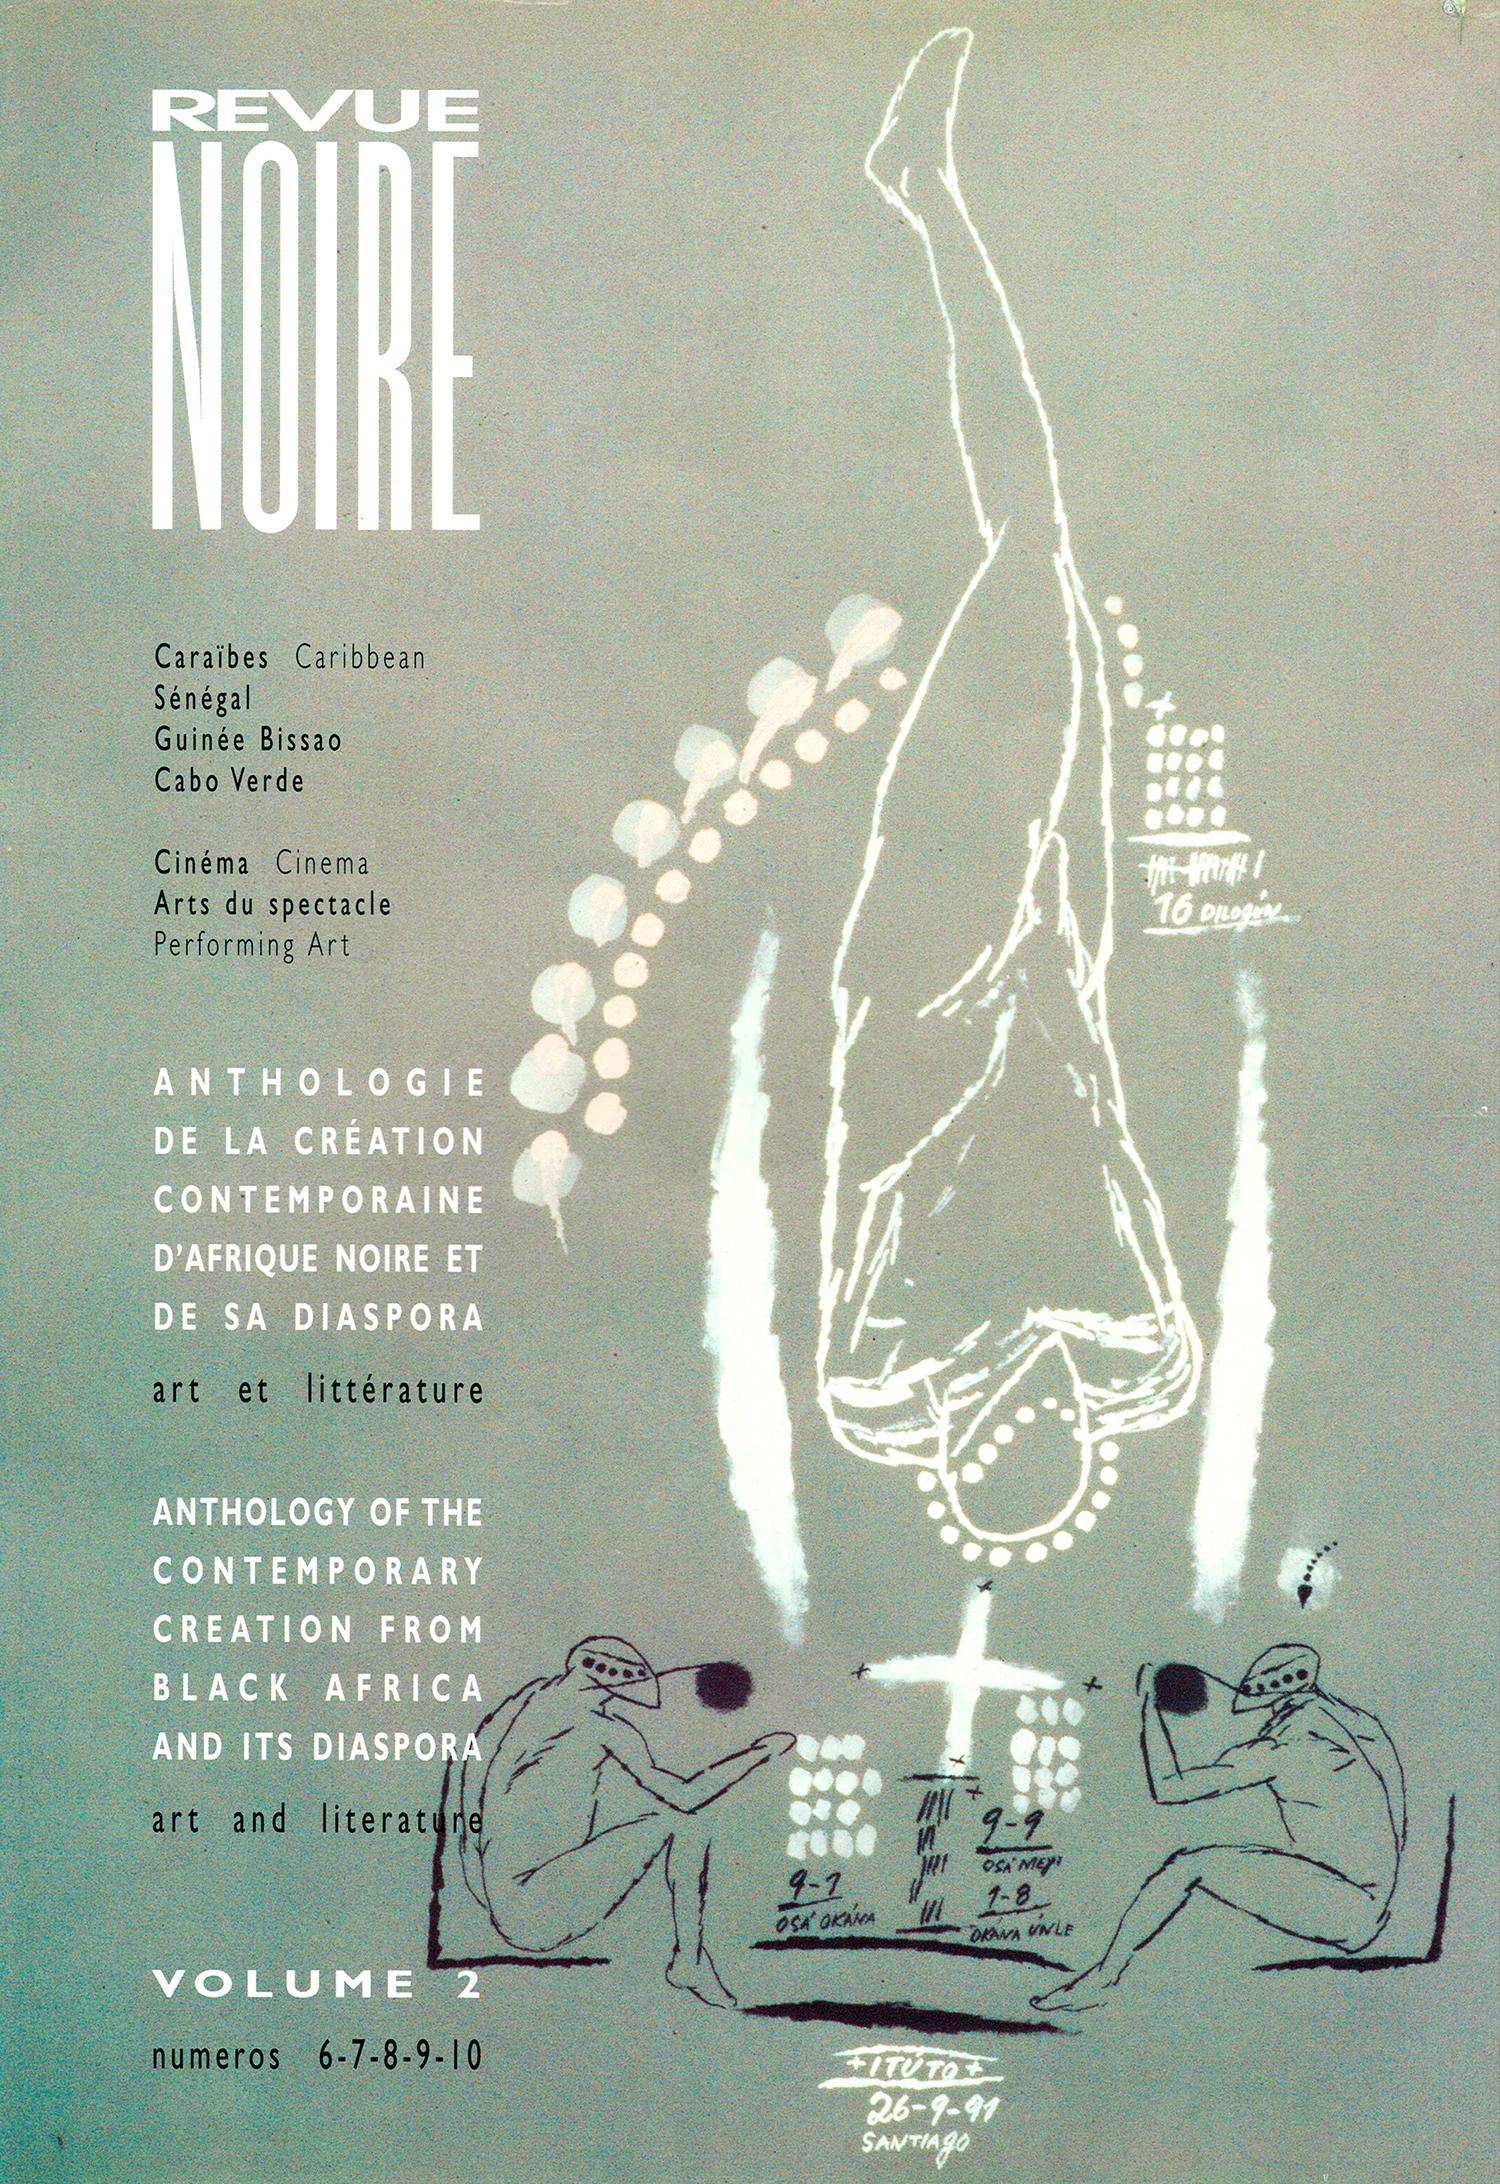 Book 'Anthology Revue Noire Magazine Vol. 02' issues 06 to 10